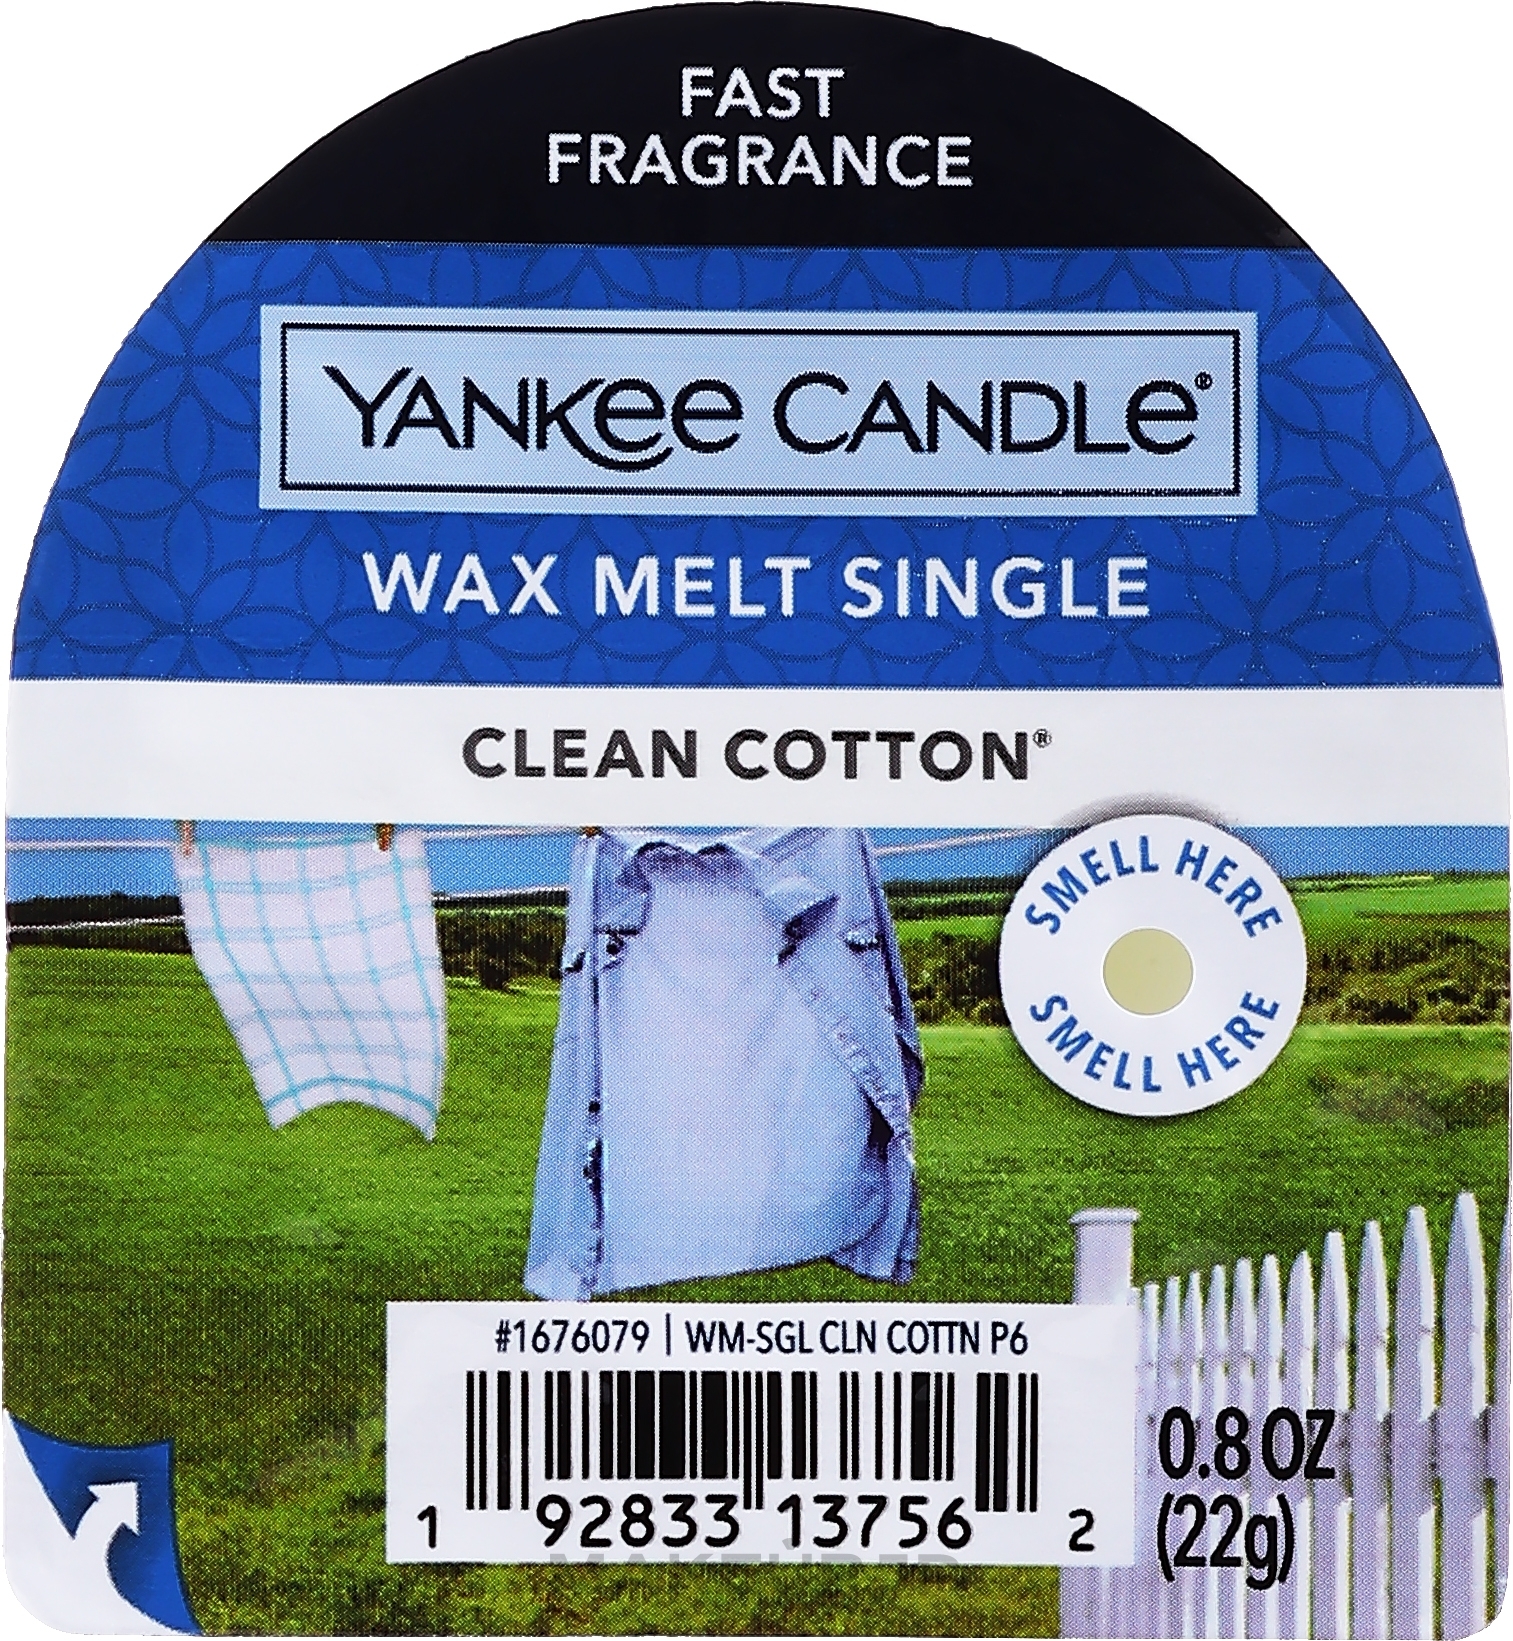 Scented Wax - Yankee Candle Clean Cotton Tarts Wax Melts — photo 22 g